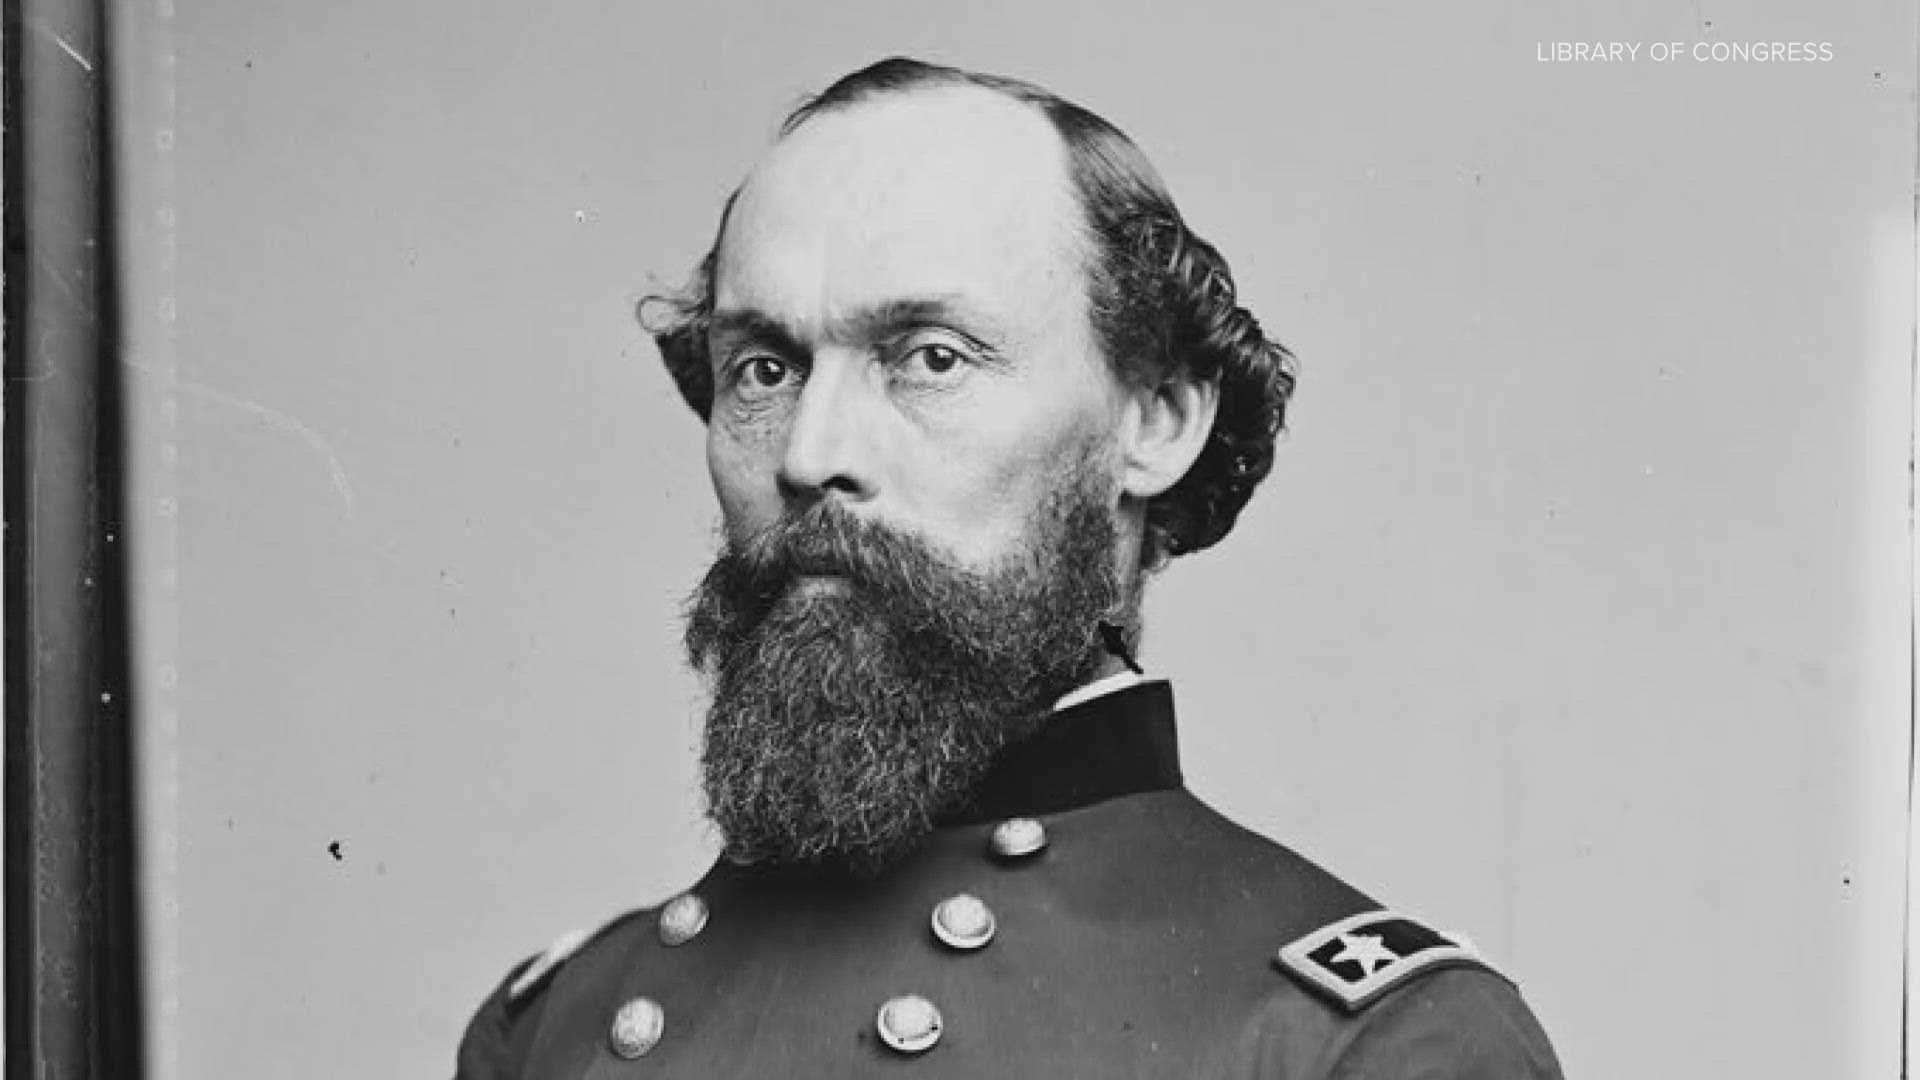 United States Maj. Gen. Gordon Granger is the Union leader who read the order in Galveston, Texas, that all enslaved people were free on June 19, 1865.